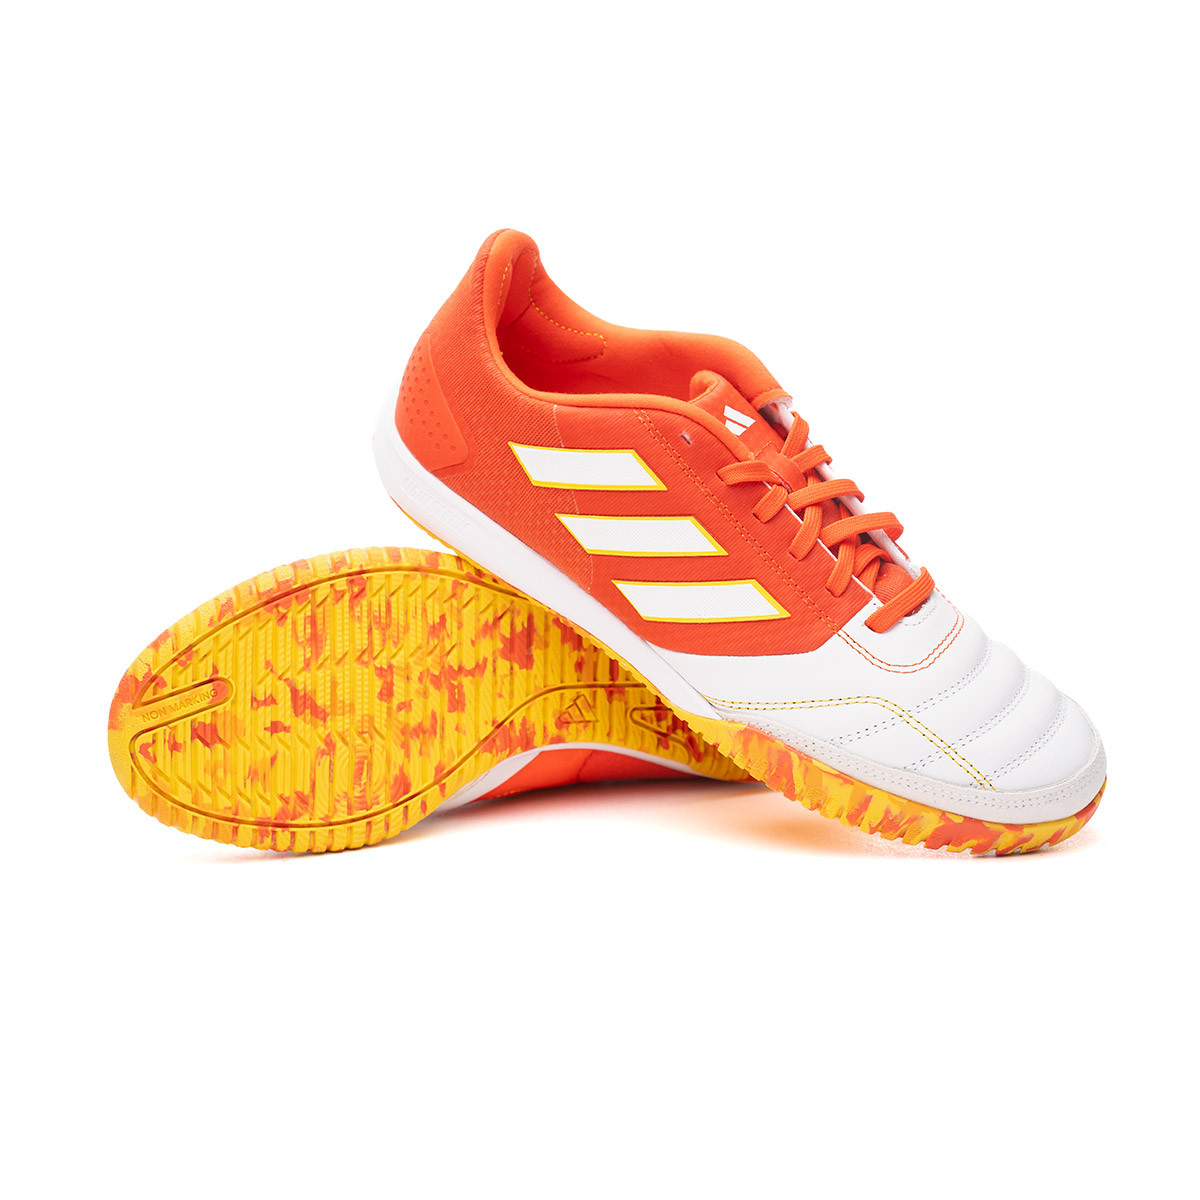 Indoor Fútbol Sala Emotion Bold Gold - Orange-Ftwr Competition Top White-Bold boots adidas